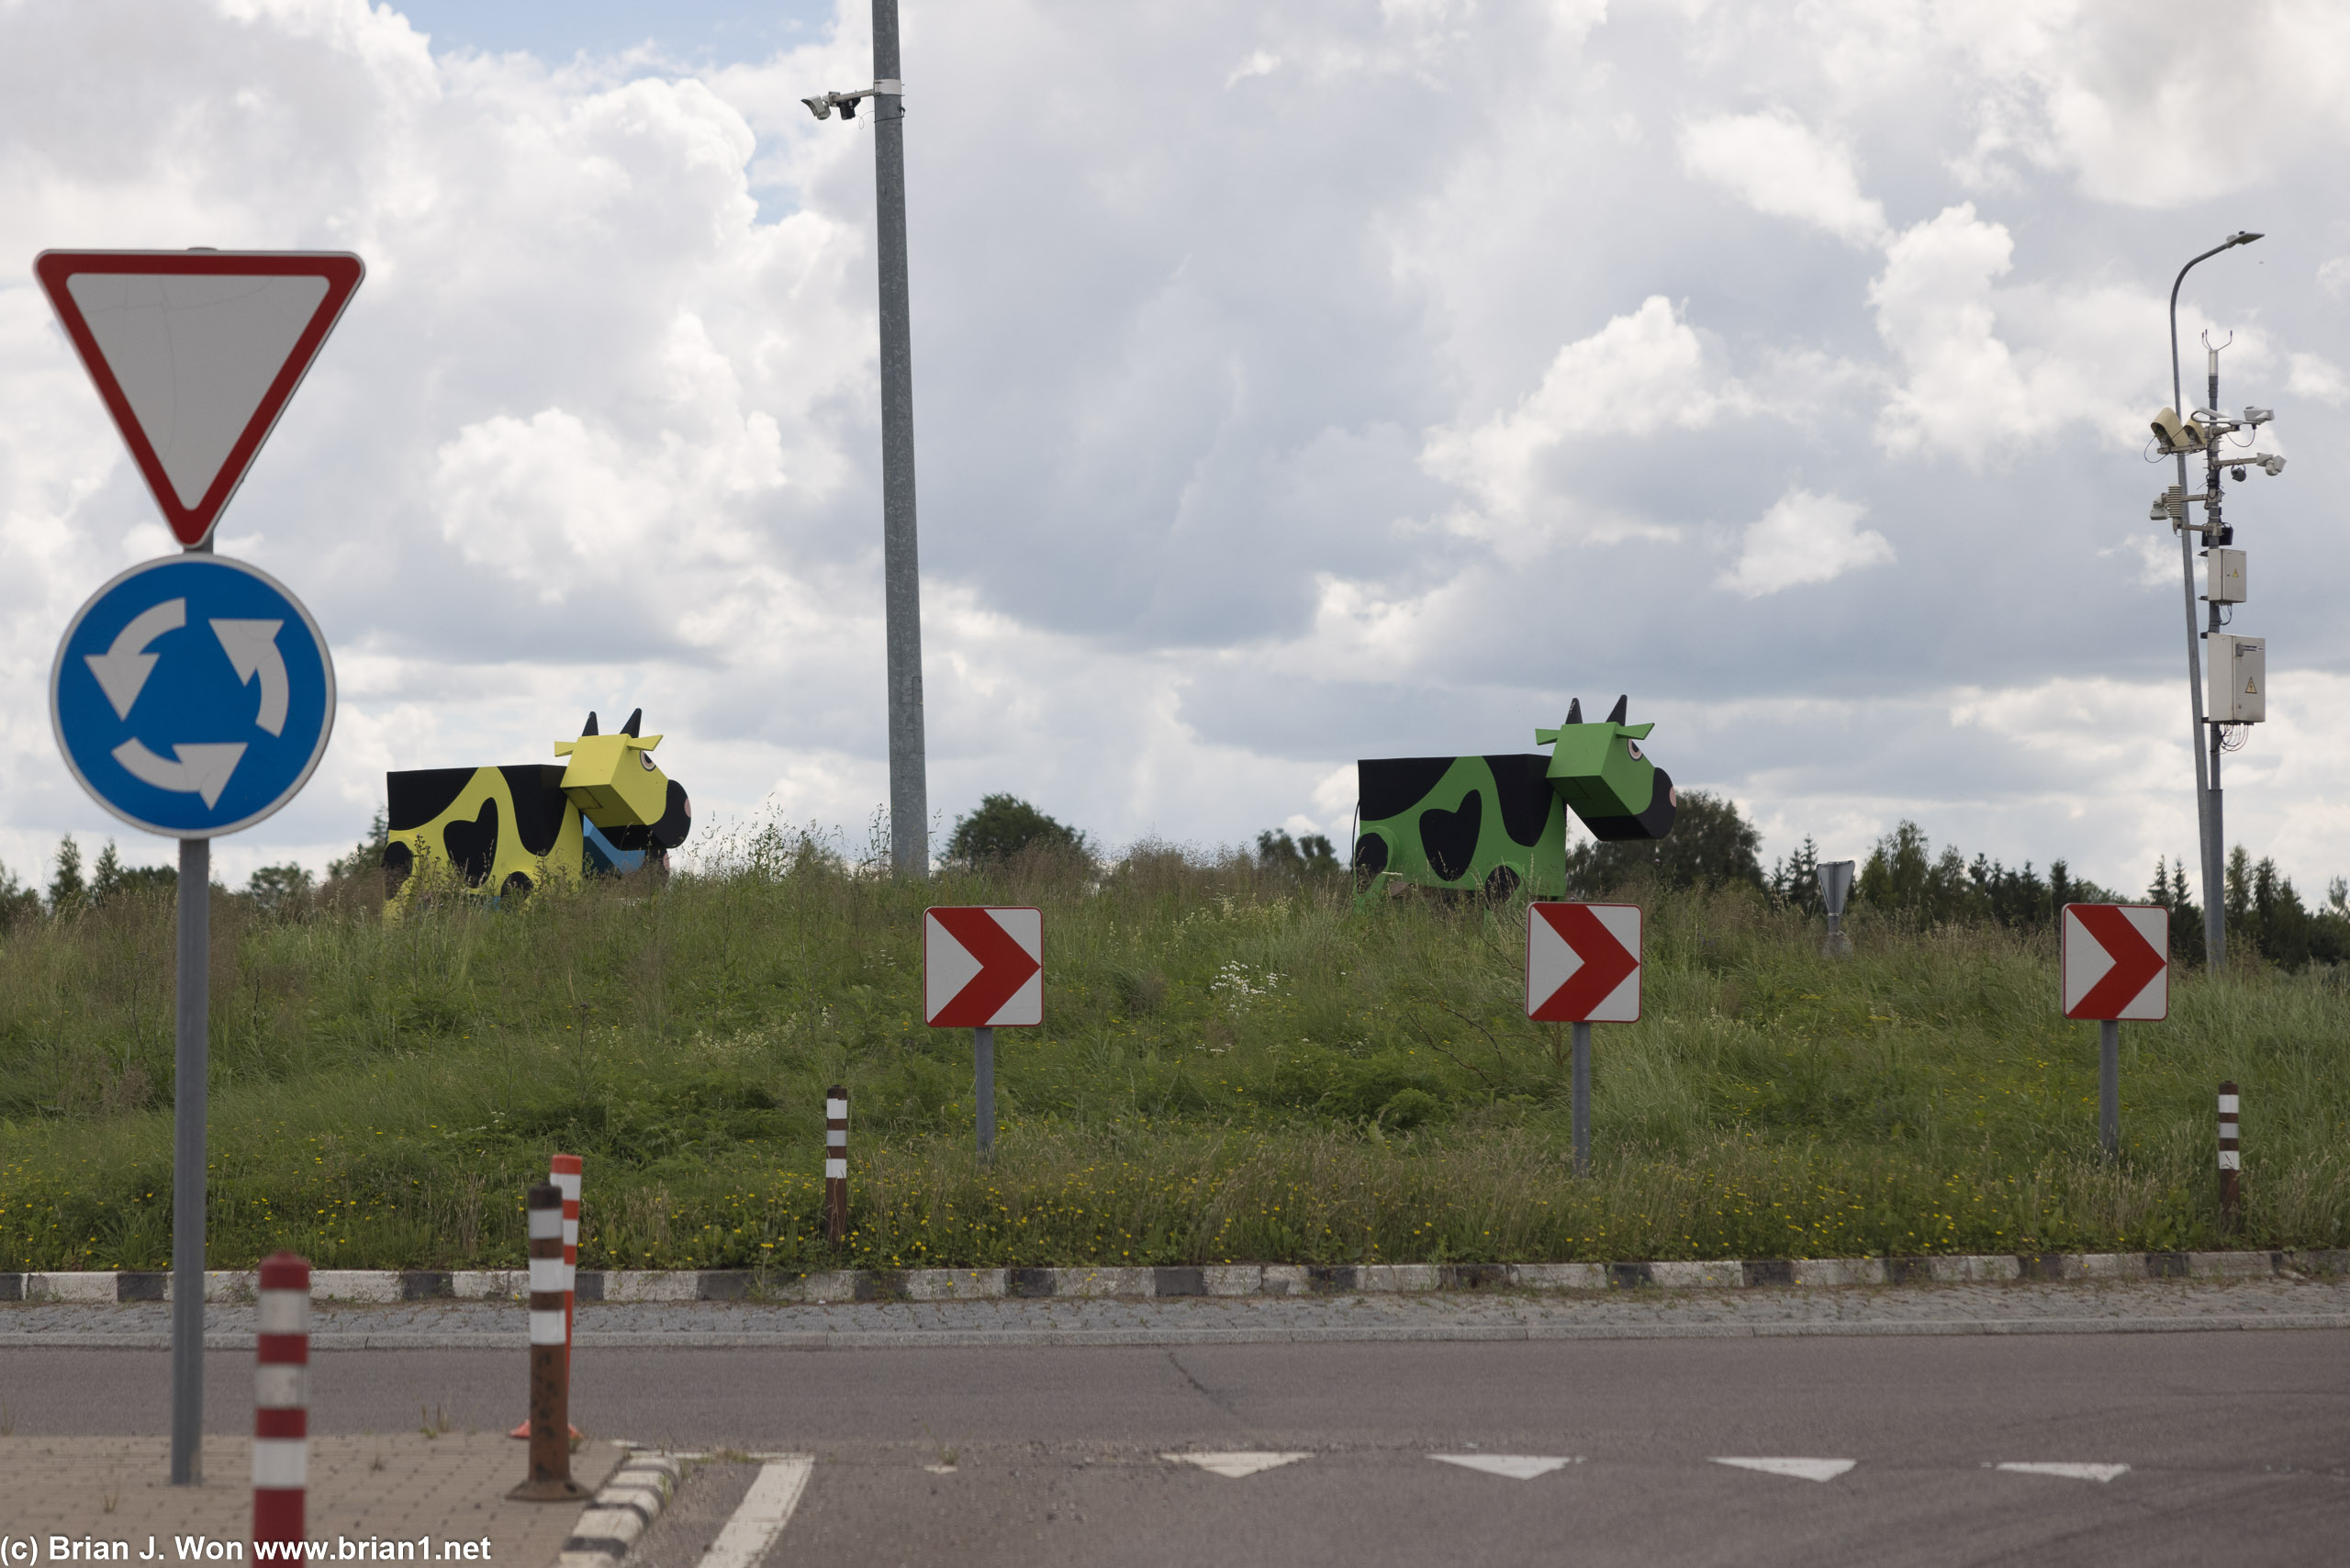 Cubist cows welcoming you to Lithuania.